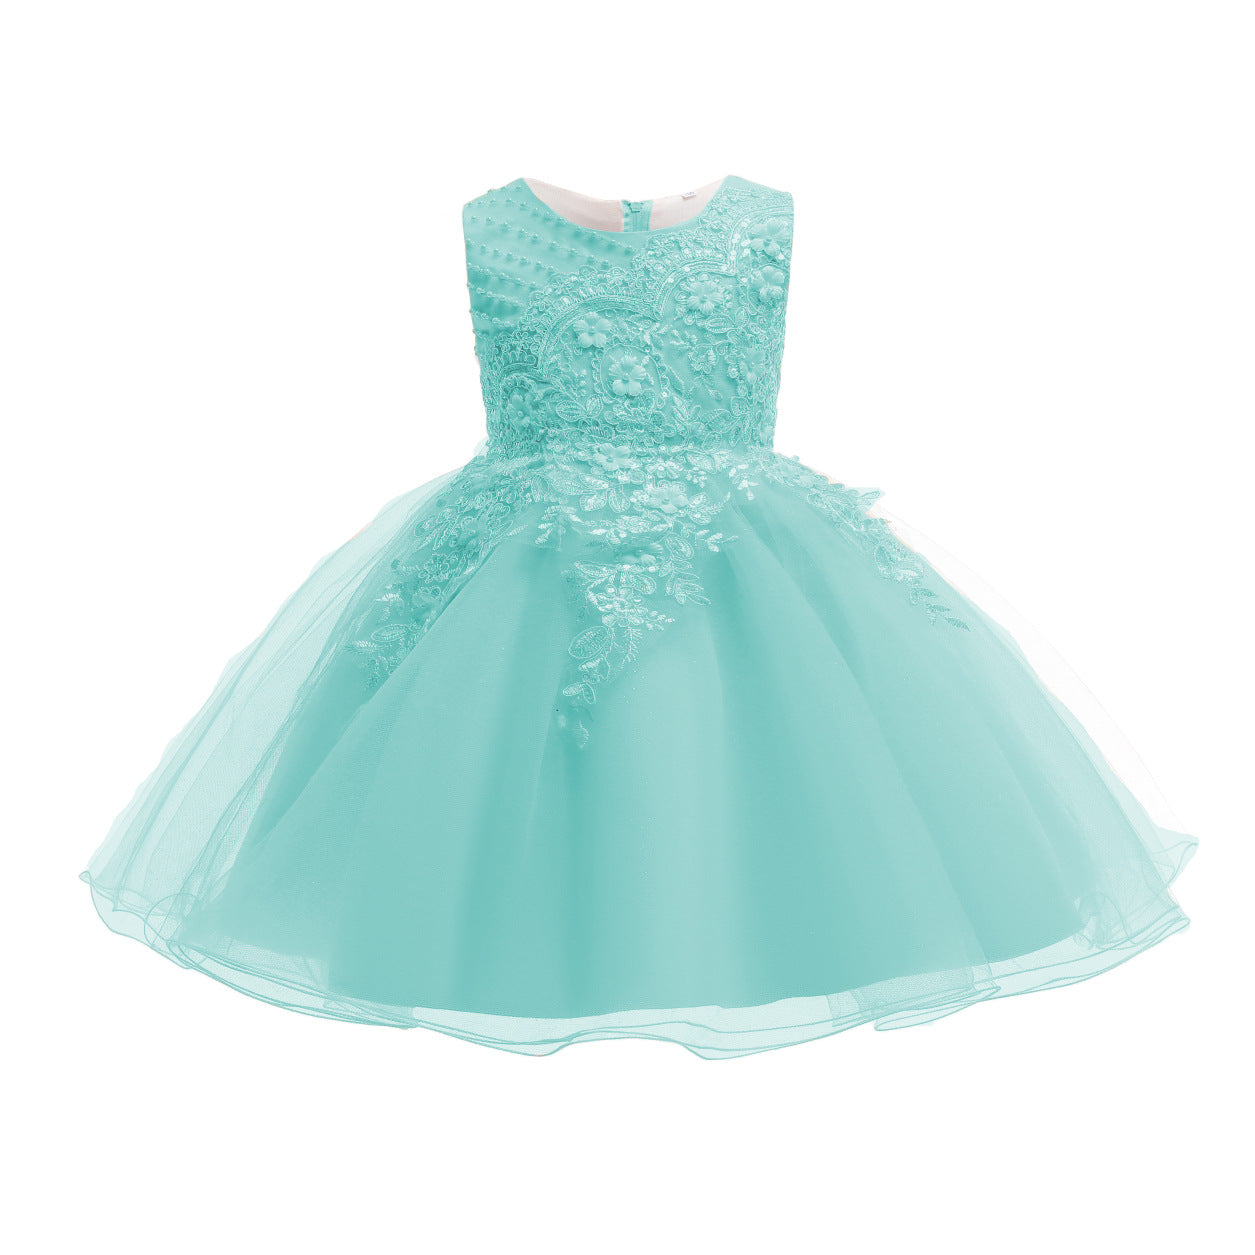 Cute Flower Girl Dresses with Imitation Pearls Colorful Sleeveless Puffy Tull Gown for Kids